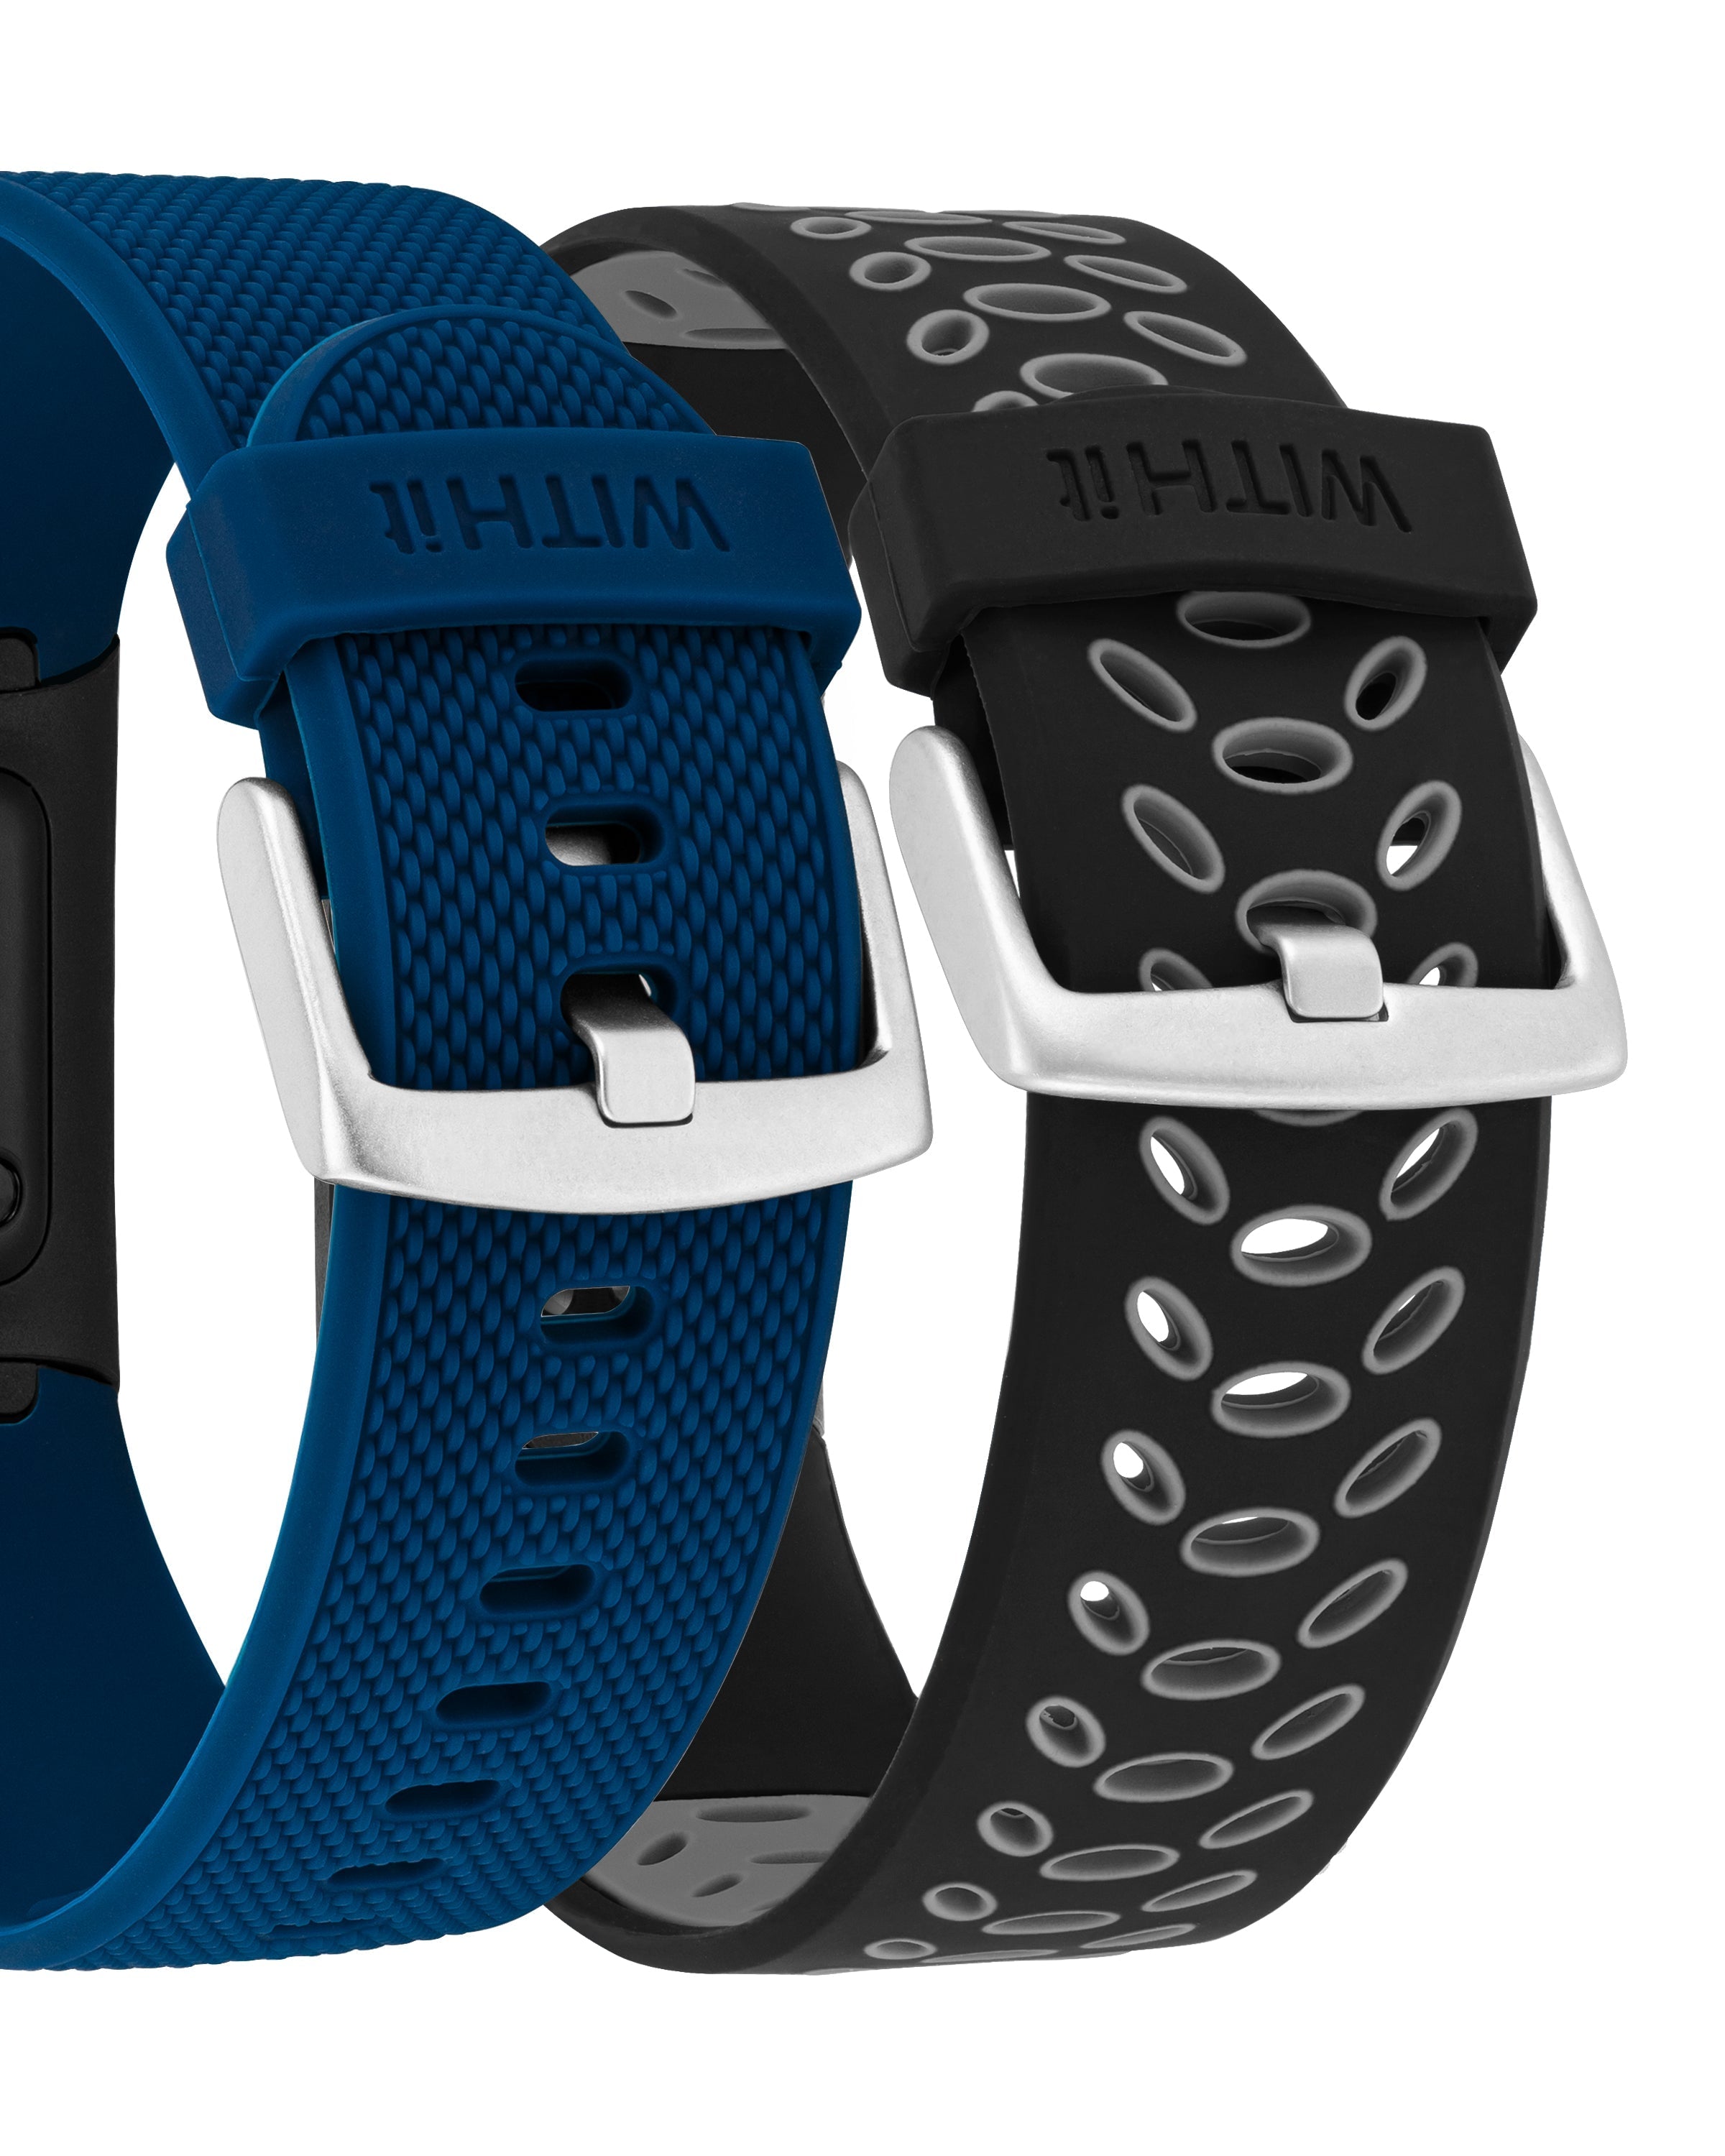 Silicone Bands for the Fitbit Charge, 2-Pack